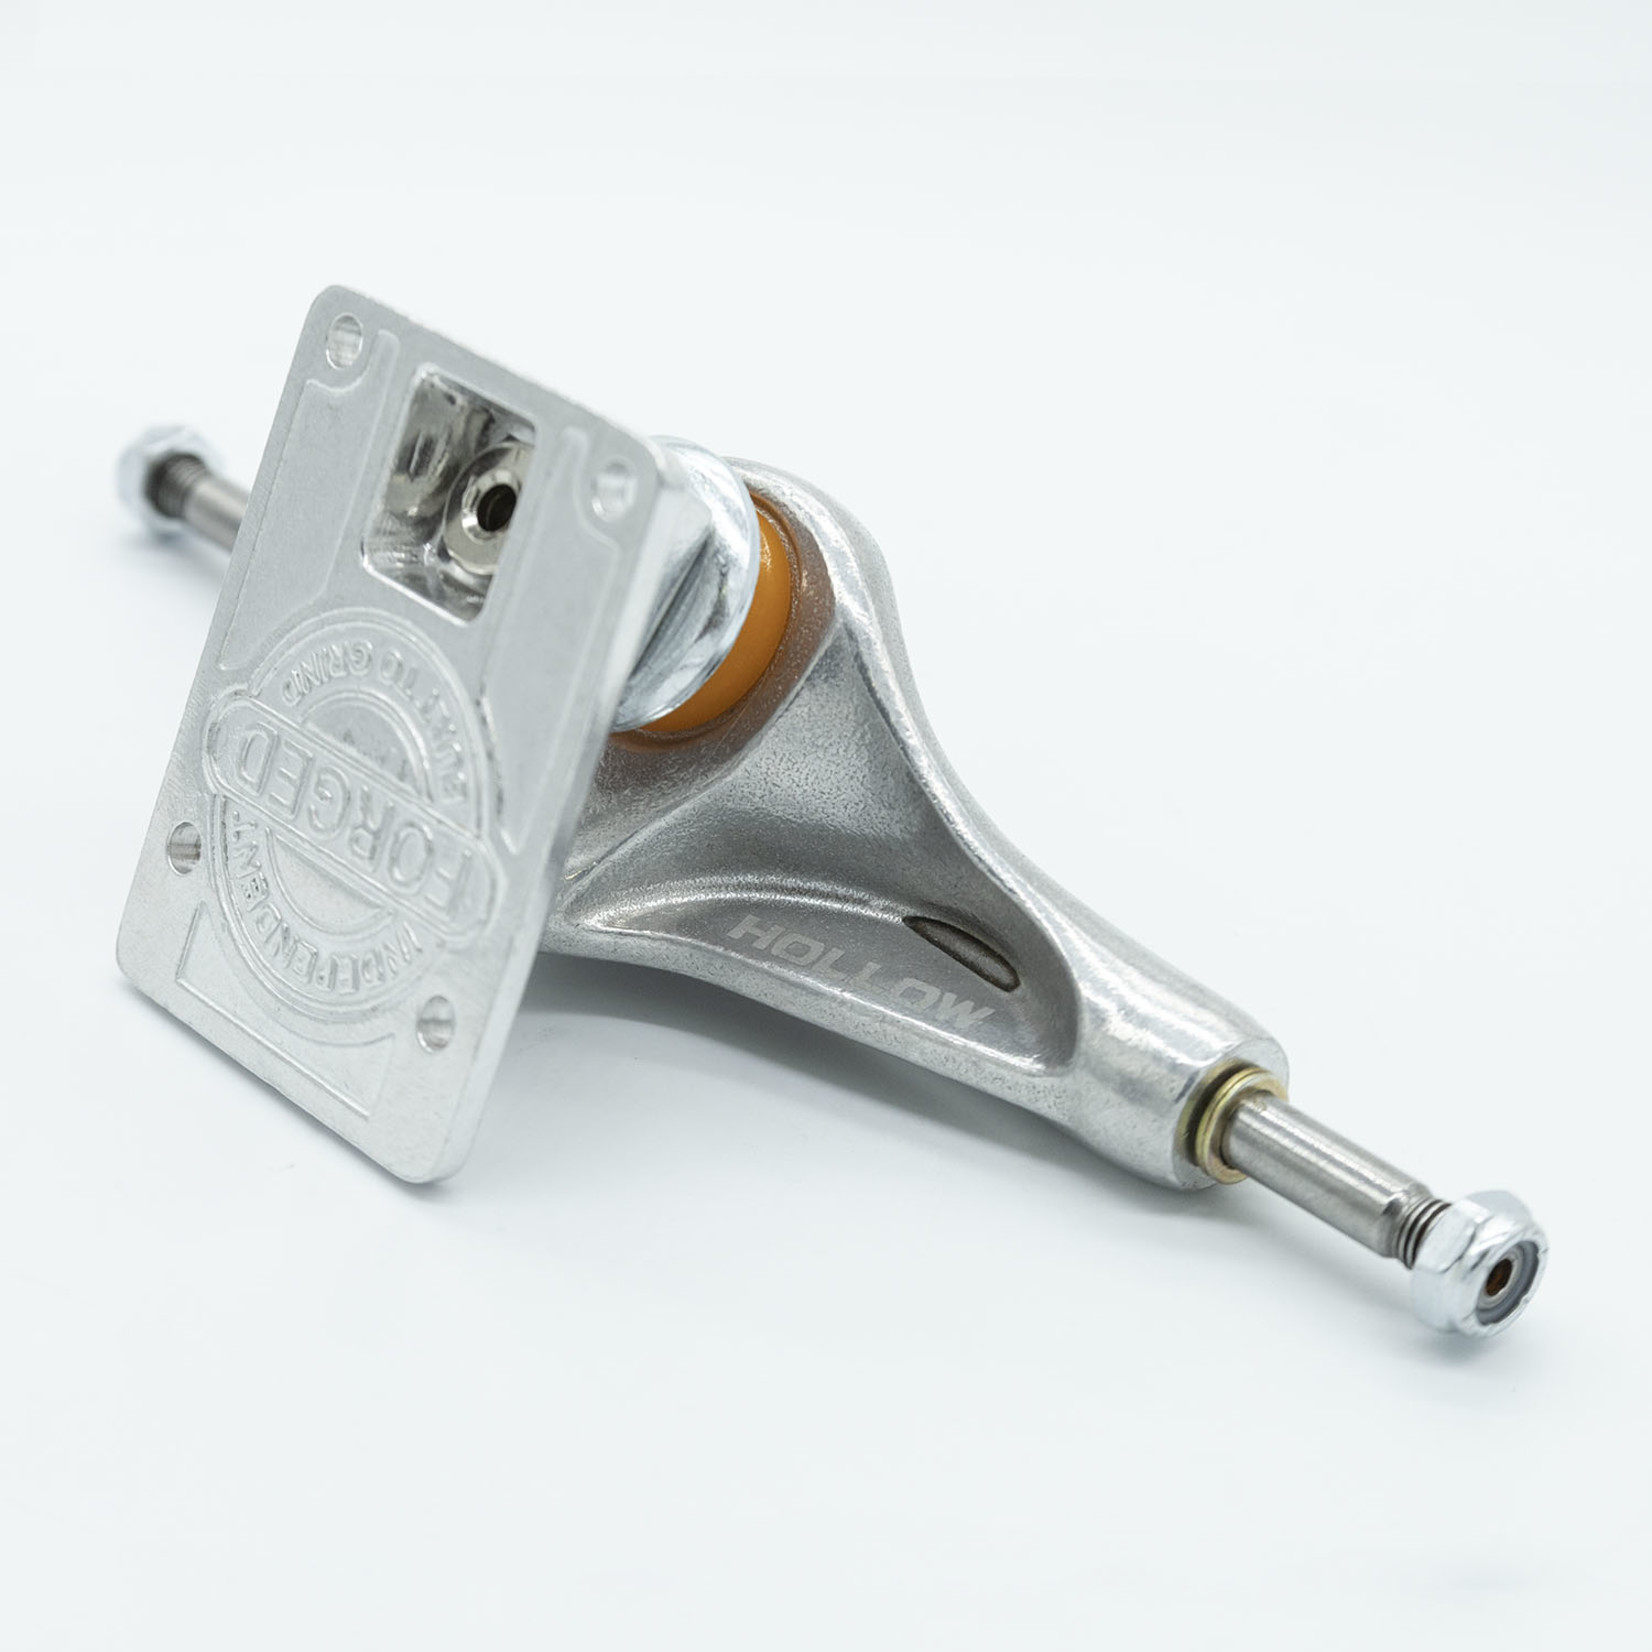 Independent Independent 139 Stage 11 Forged Hollow Silver Standard Trucks